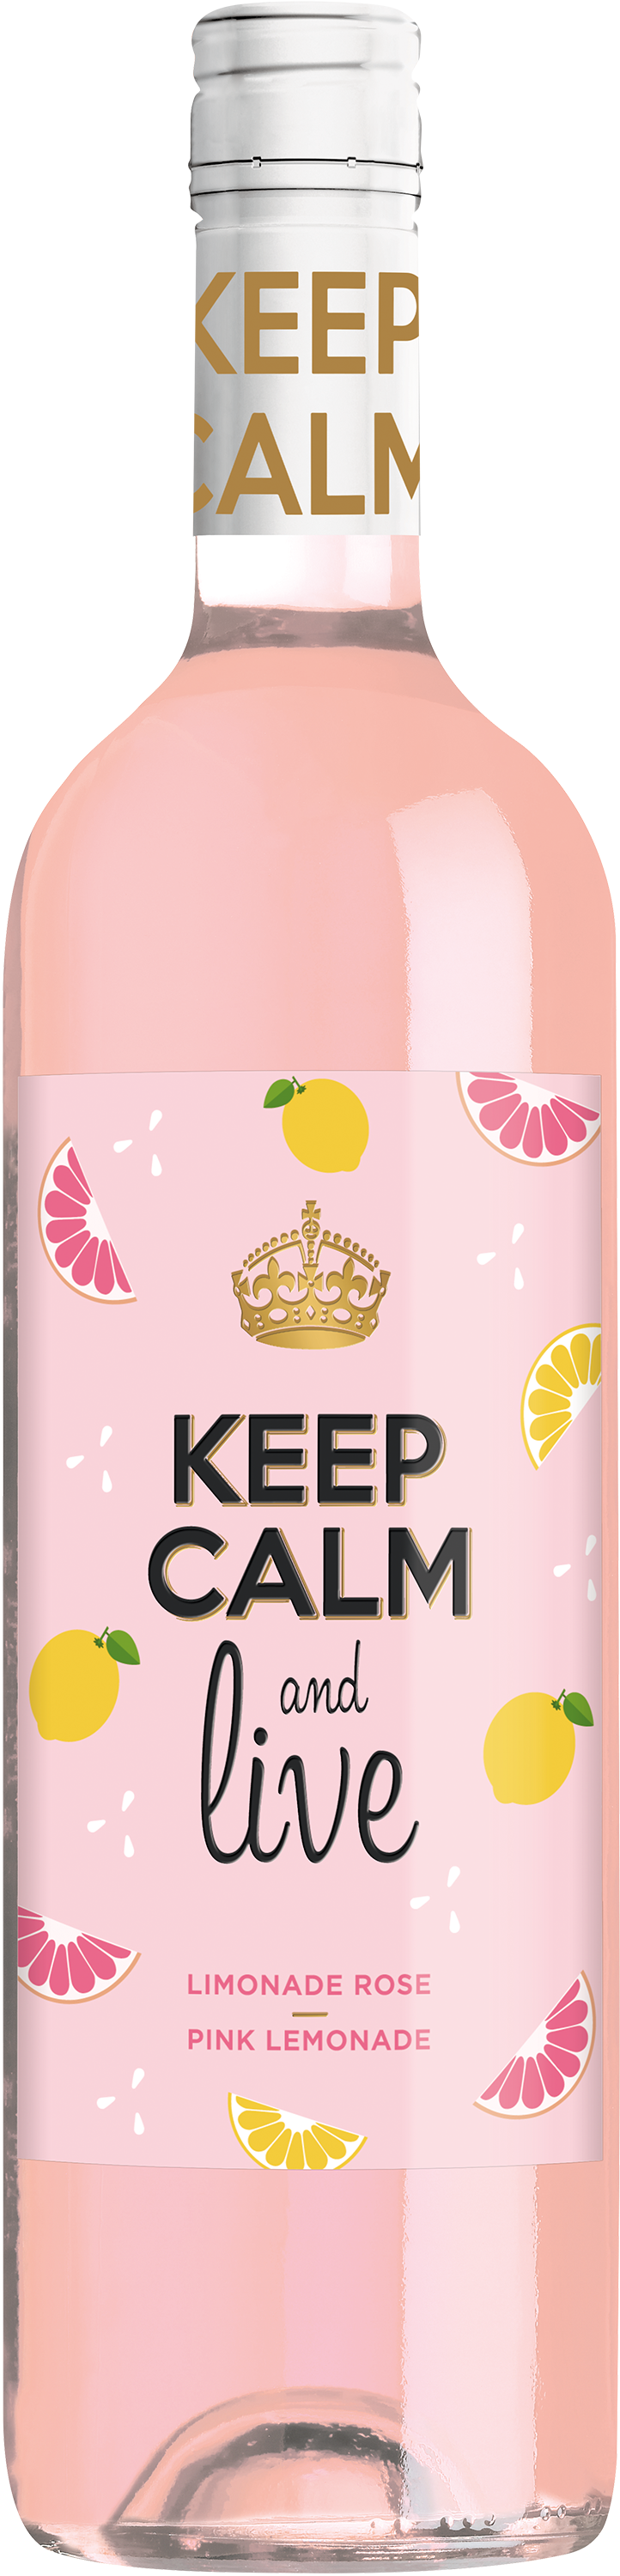 Keep Calm and Live Limonade rose